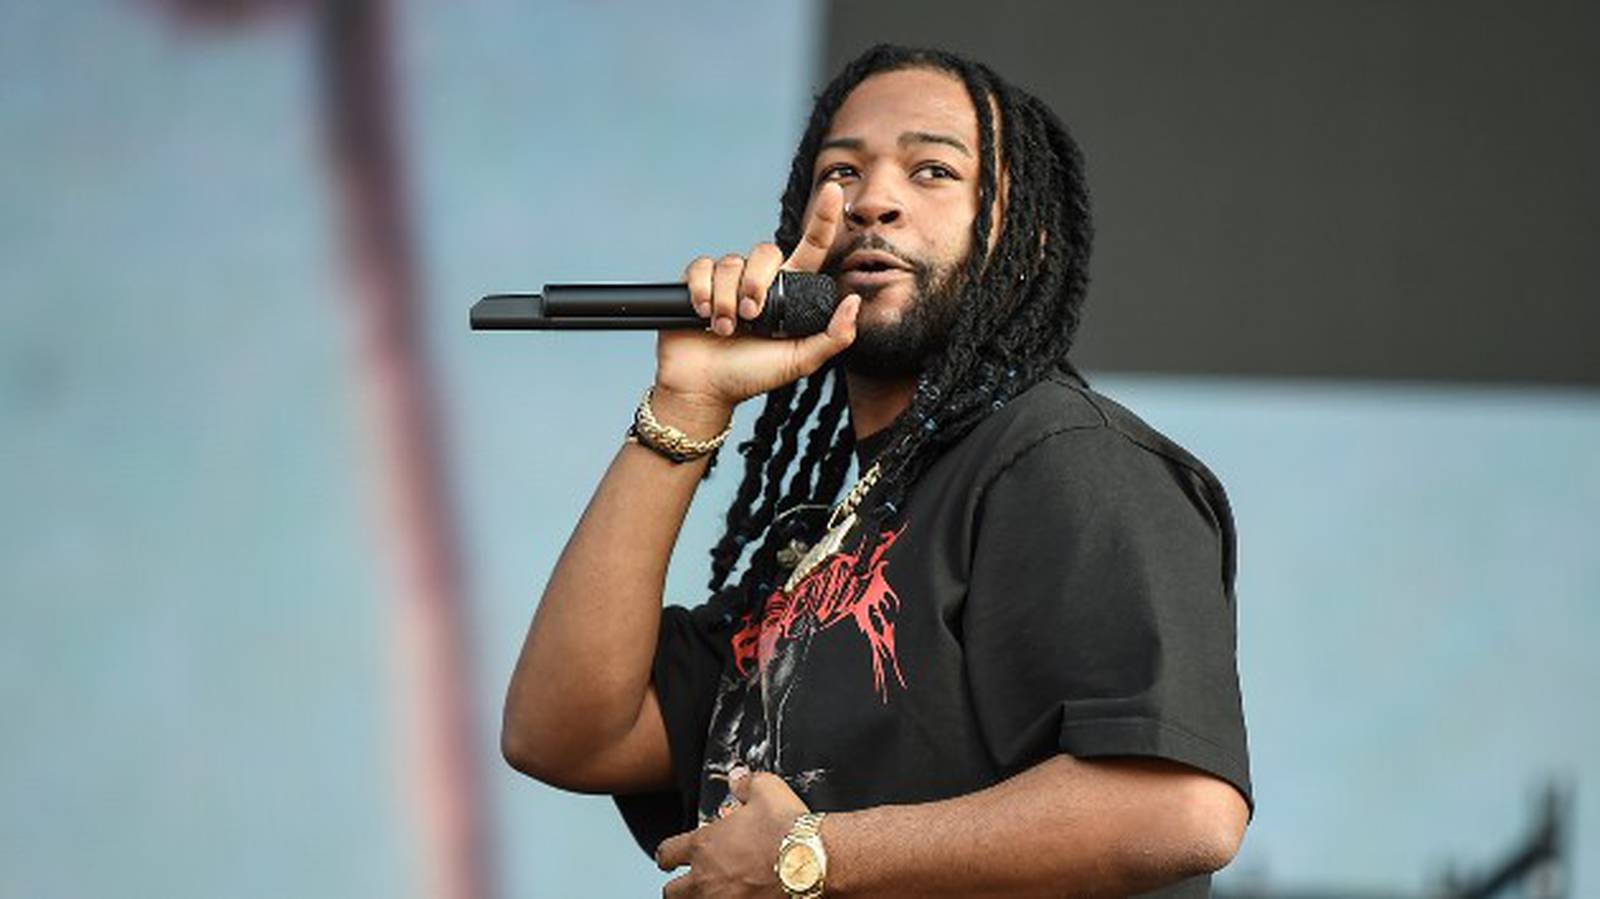 PartyNextDoor shares Sorry I'm Outside Tour dates STAR 94.5